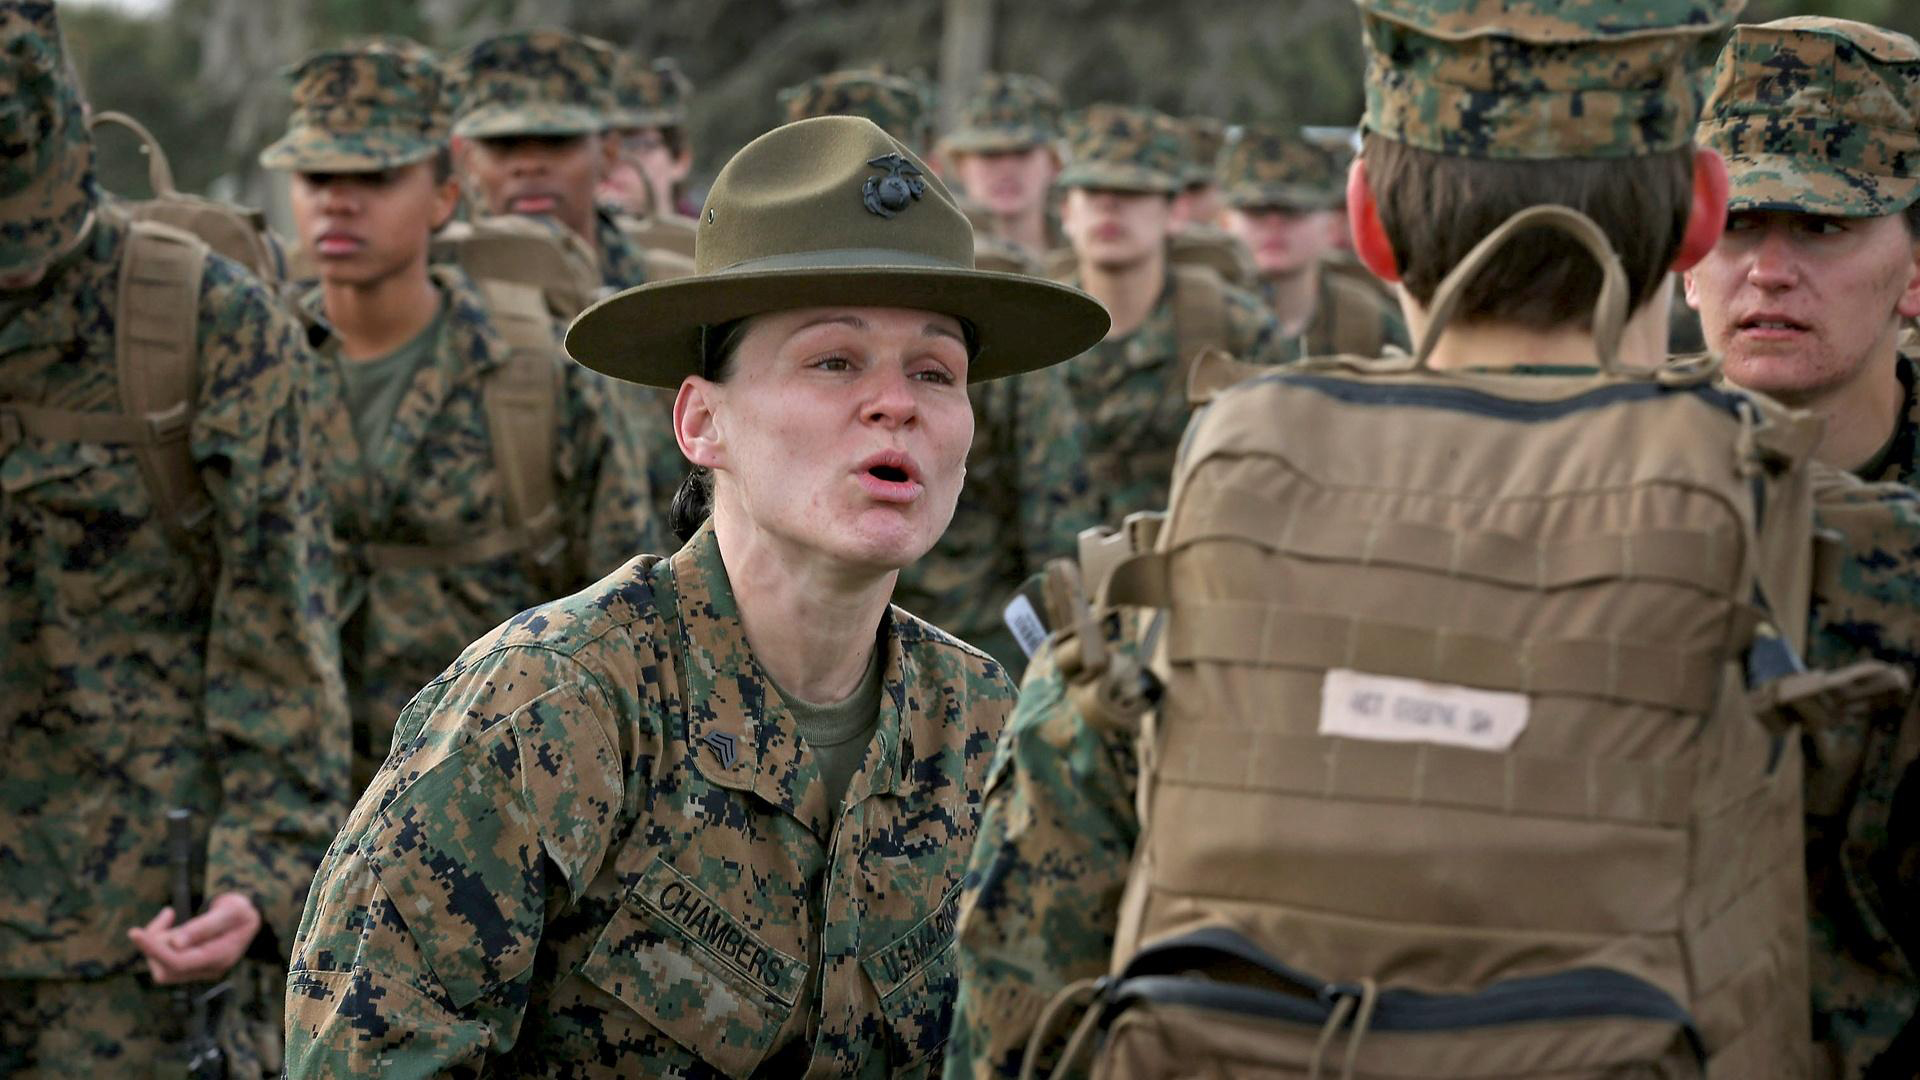 A female Marine in a brown hat, identified by the name "Chambers" on her uniform, speaks to a group of Marines in camouflage. They stand attentively, some with backpacks, in an outdoor setting.